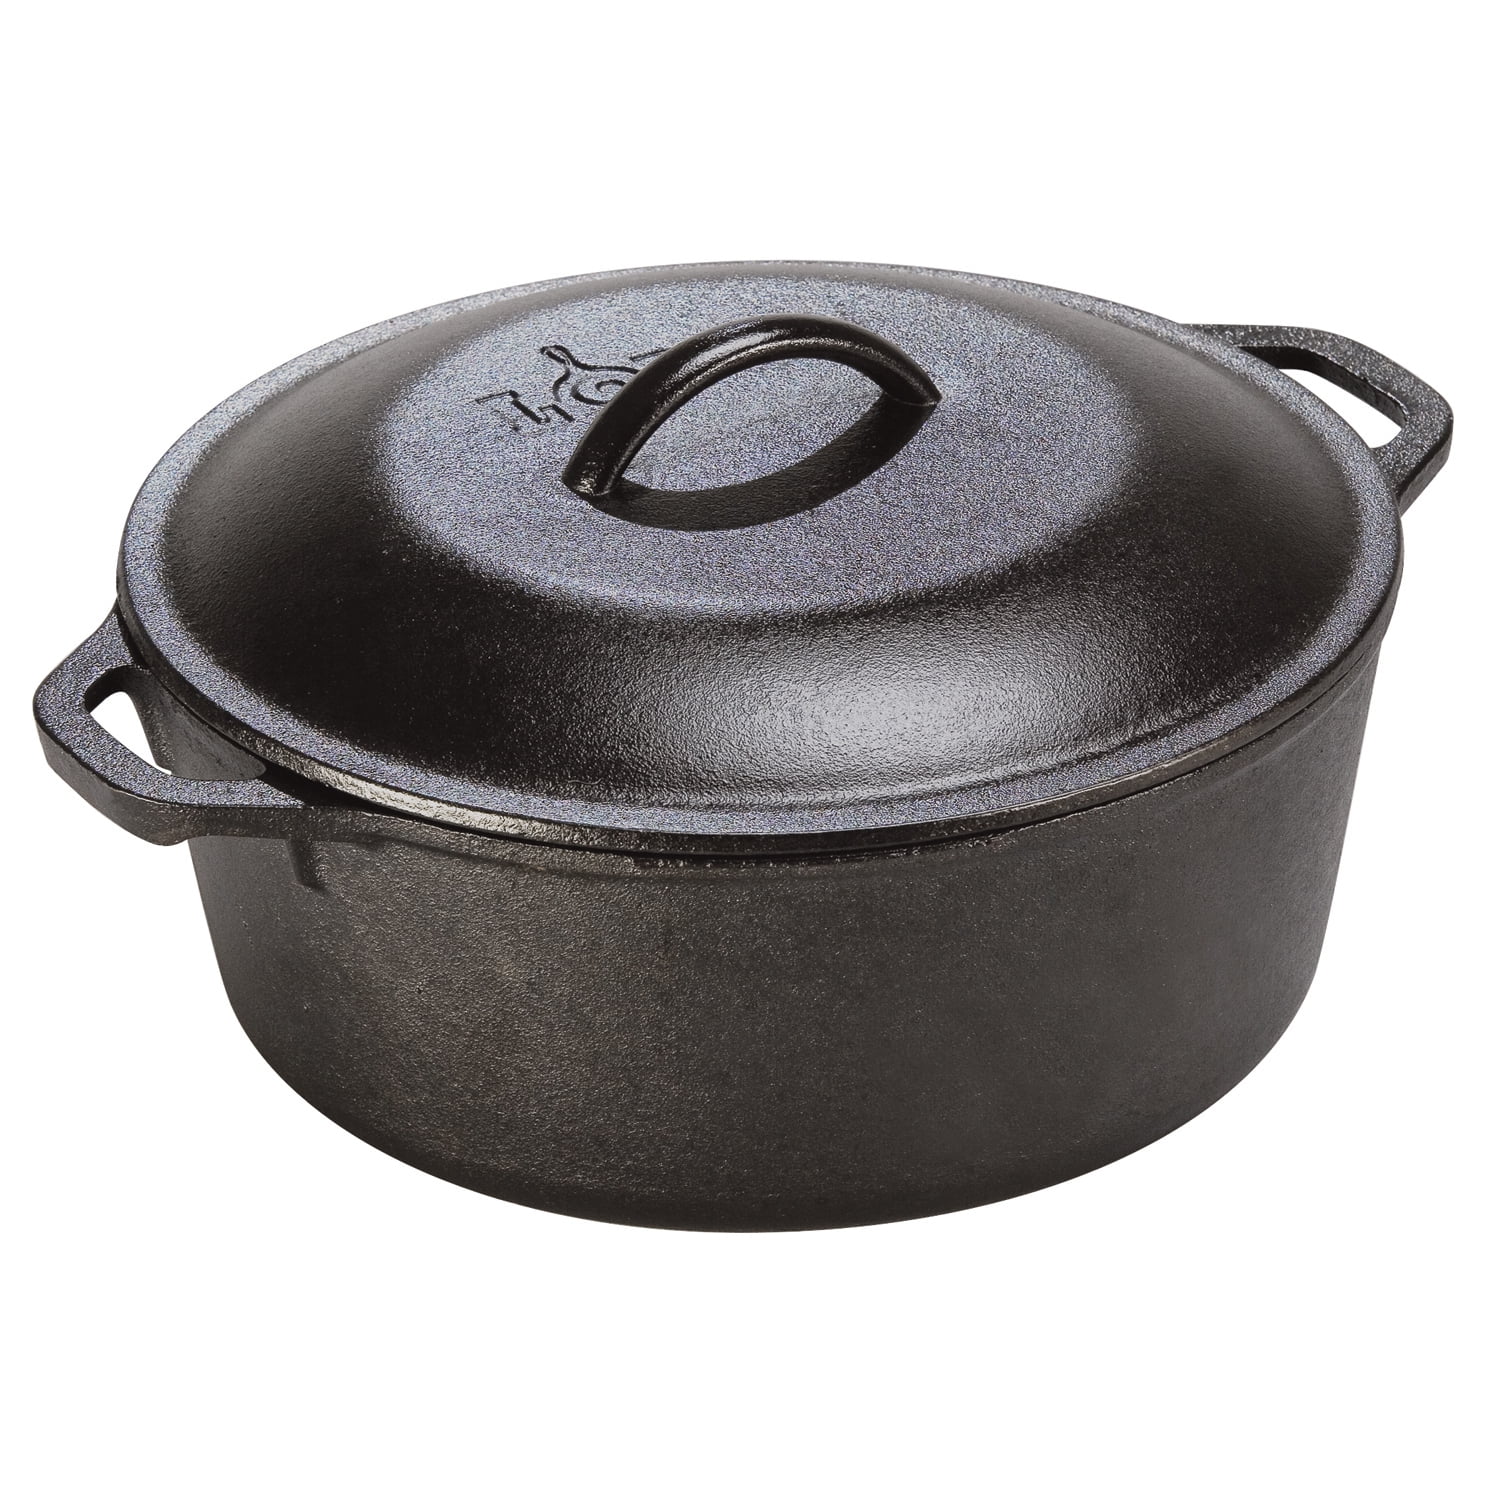 Lodge 5 Quart 12 Dia Deep Skillet Chicken Fryer Cook w/ Iron Cover Lid Handle.. 